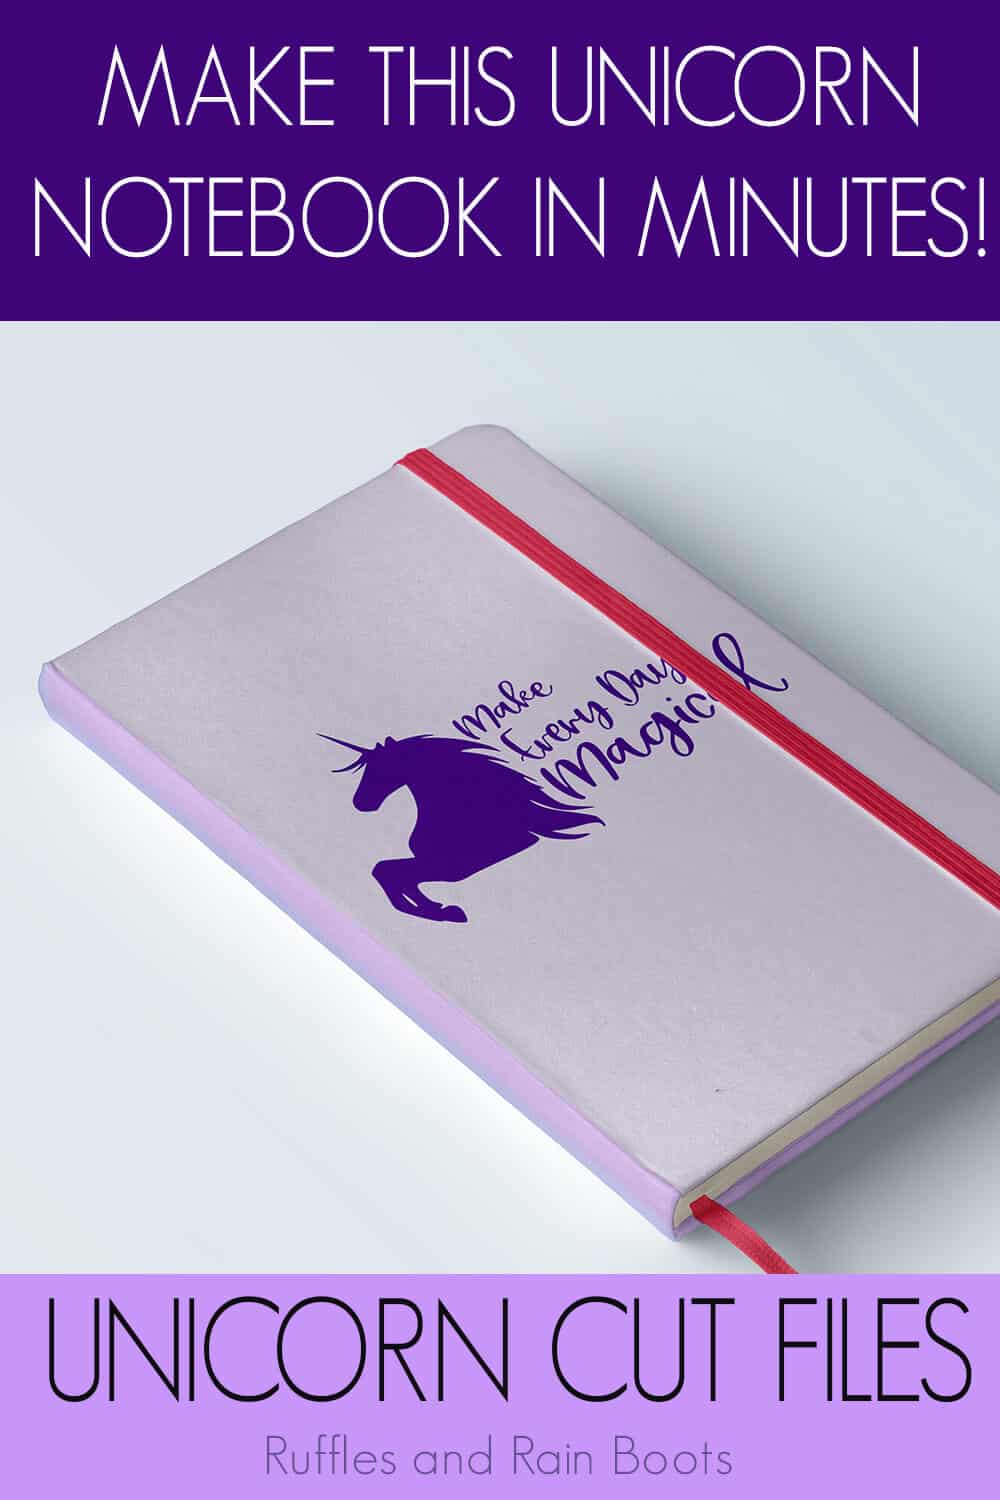 make everyday magical free unicorn svg file for silhouette on a purple notebook on a white background with text which reads make this unicorn notebook in minutes unicorn cut files